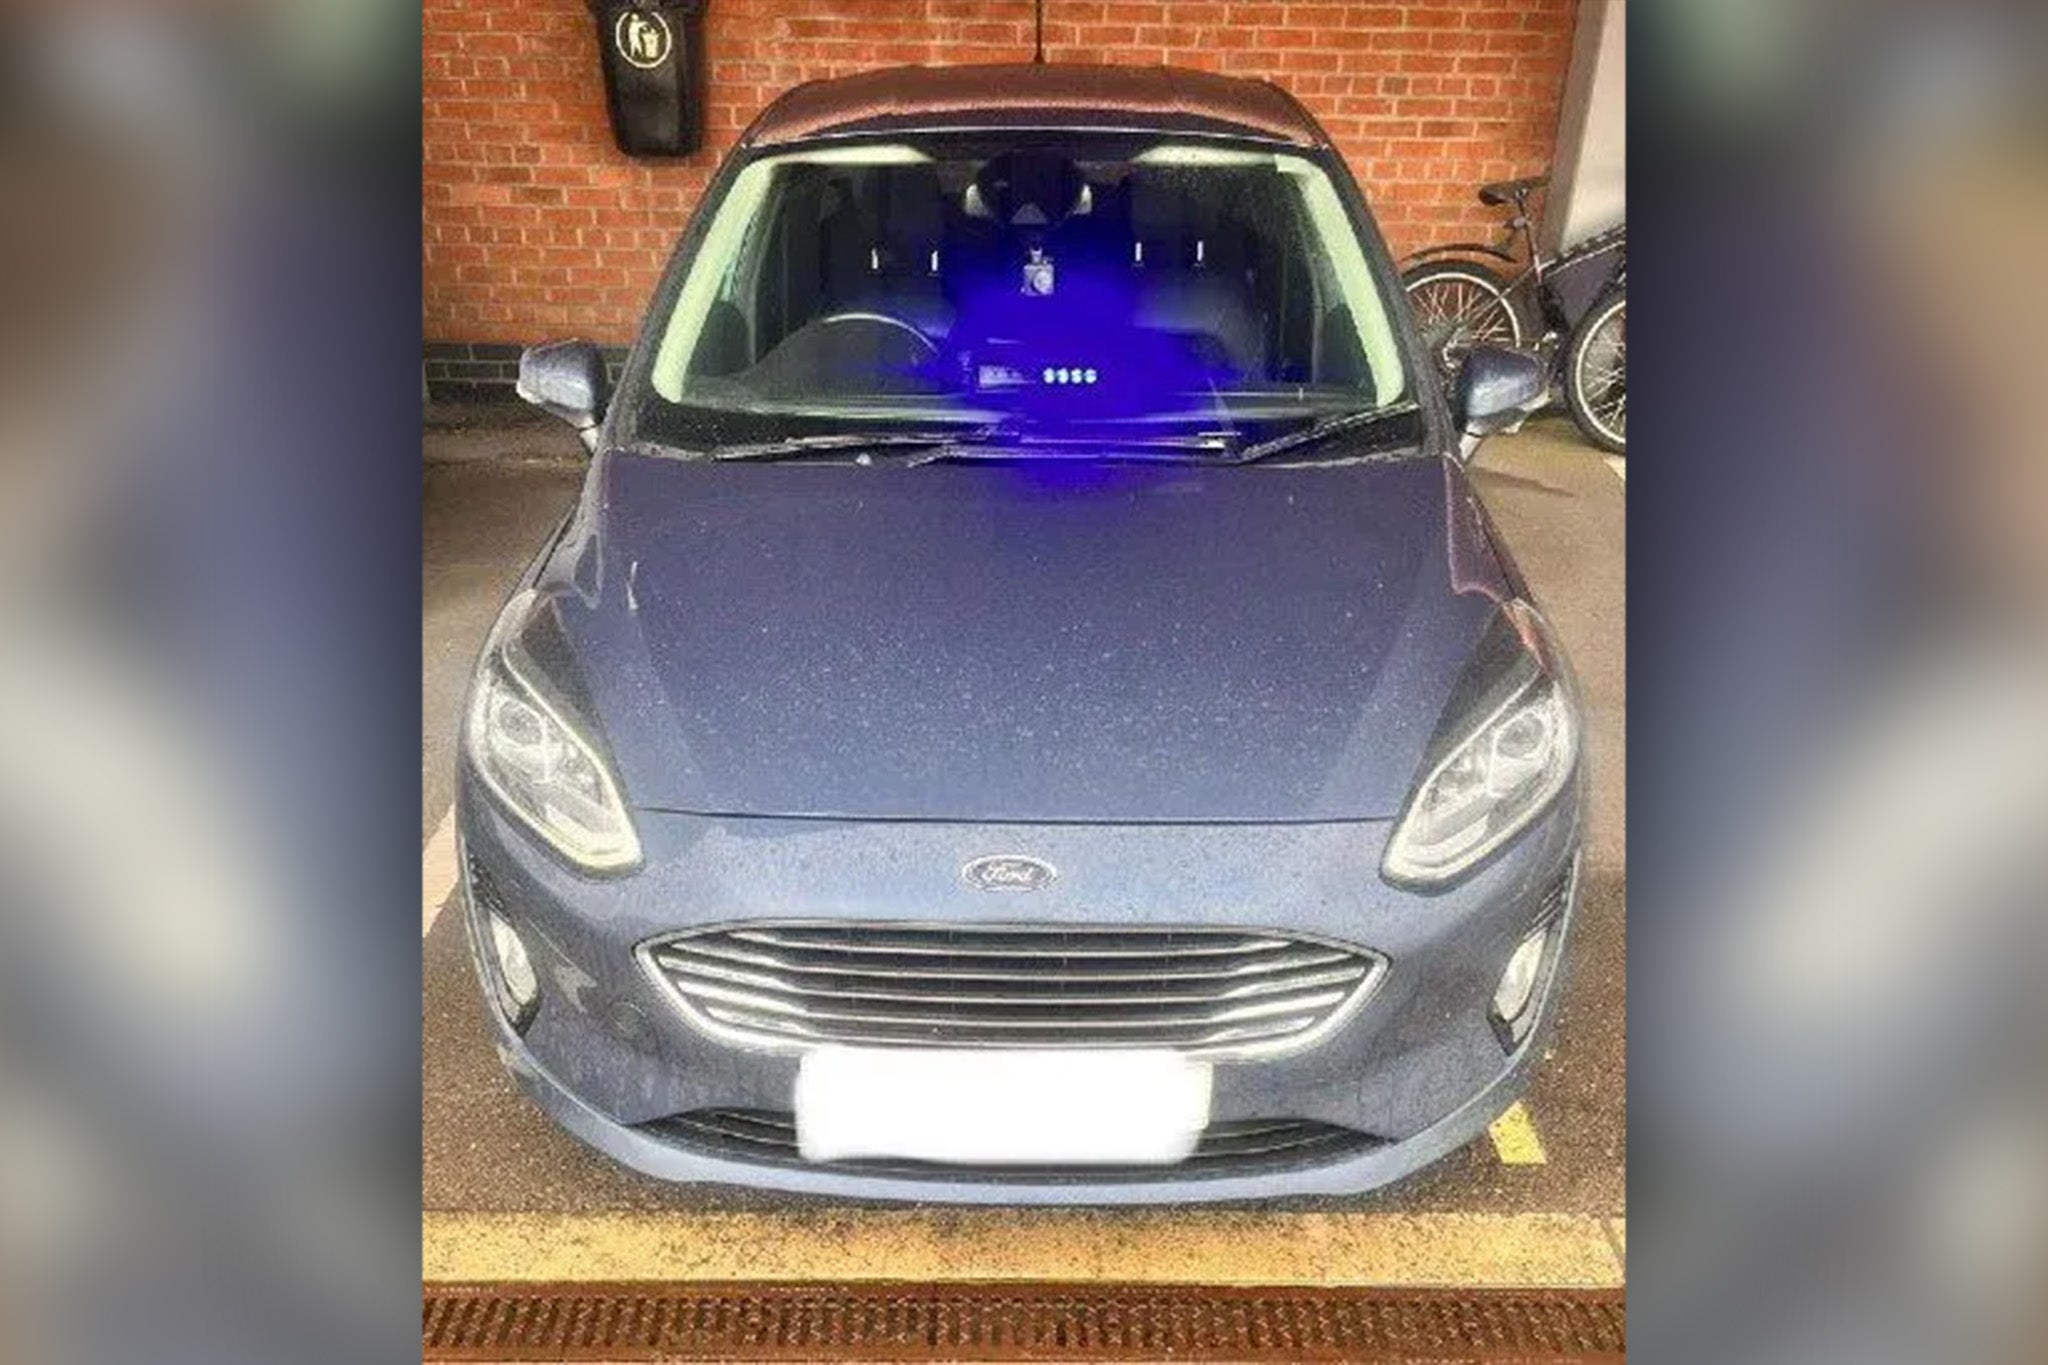 Blue lights were fitted to Chris Green’s car, with handcuffs, a dash cam and a baseball bat also found inside